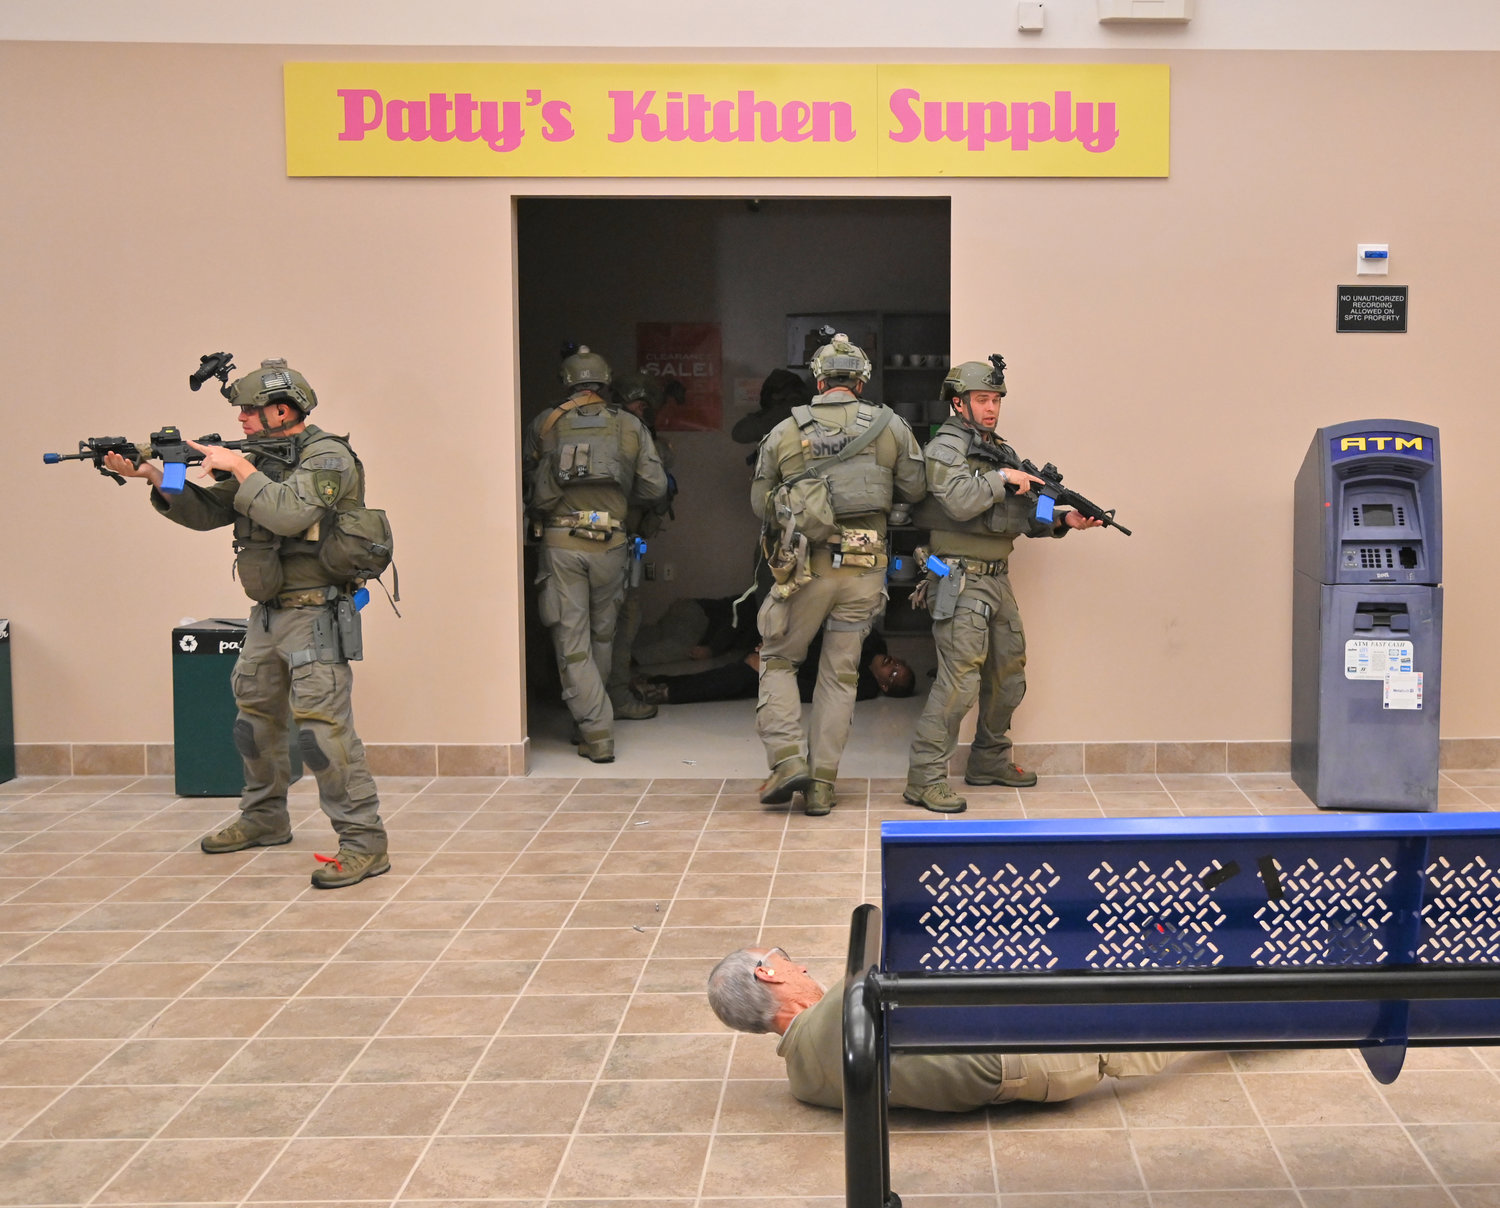 Members of the Orange County Sheriff's SWAT team take up position in a fake mall setting as part of an active shooter training scenario at the New York State Preparedness Training Center in Whitestown.